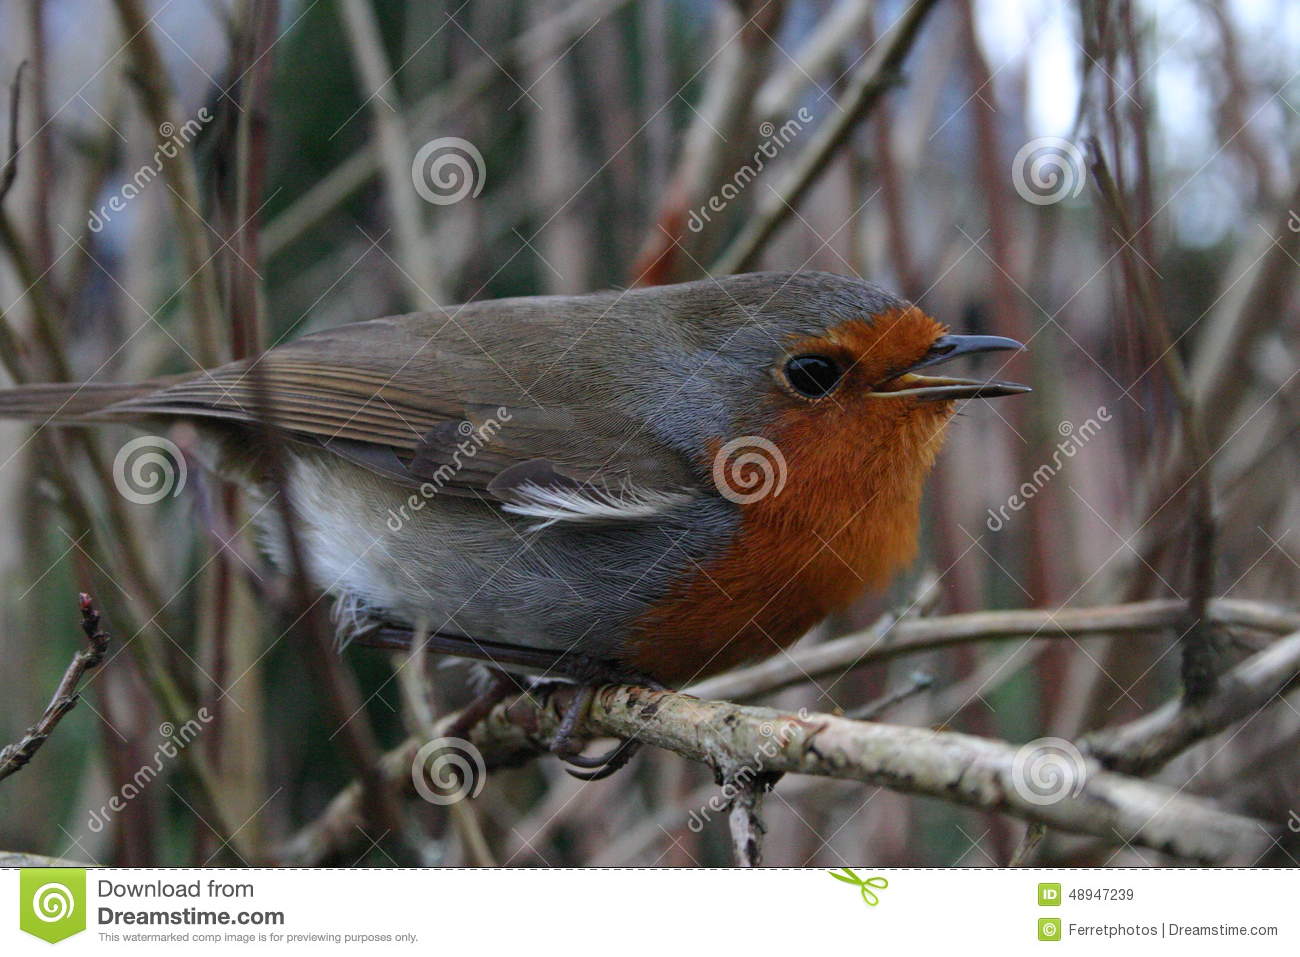 Robin Red Breast Bird Sitting In A Bush In An Attack Position To Fight